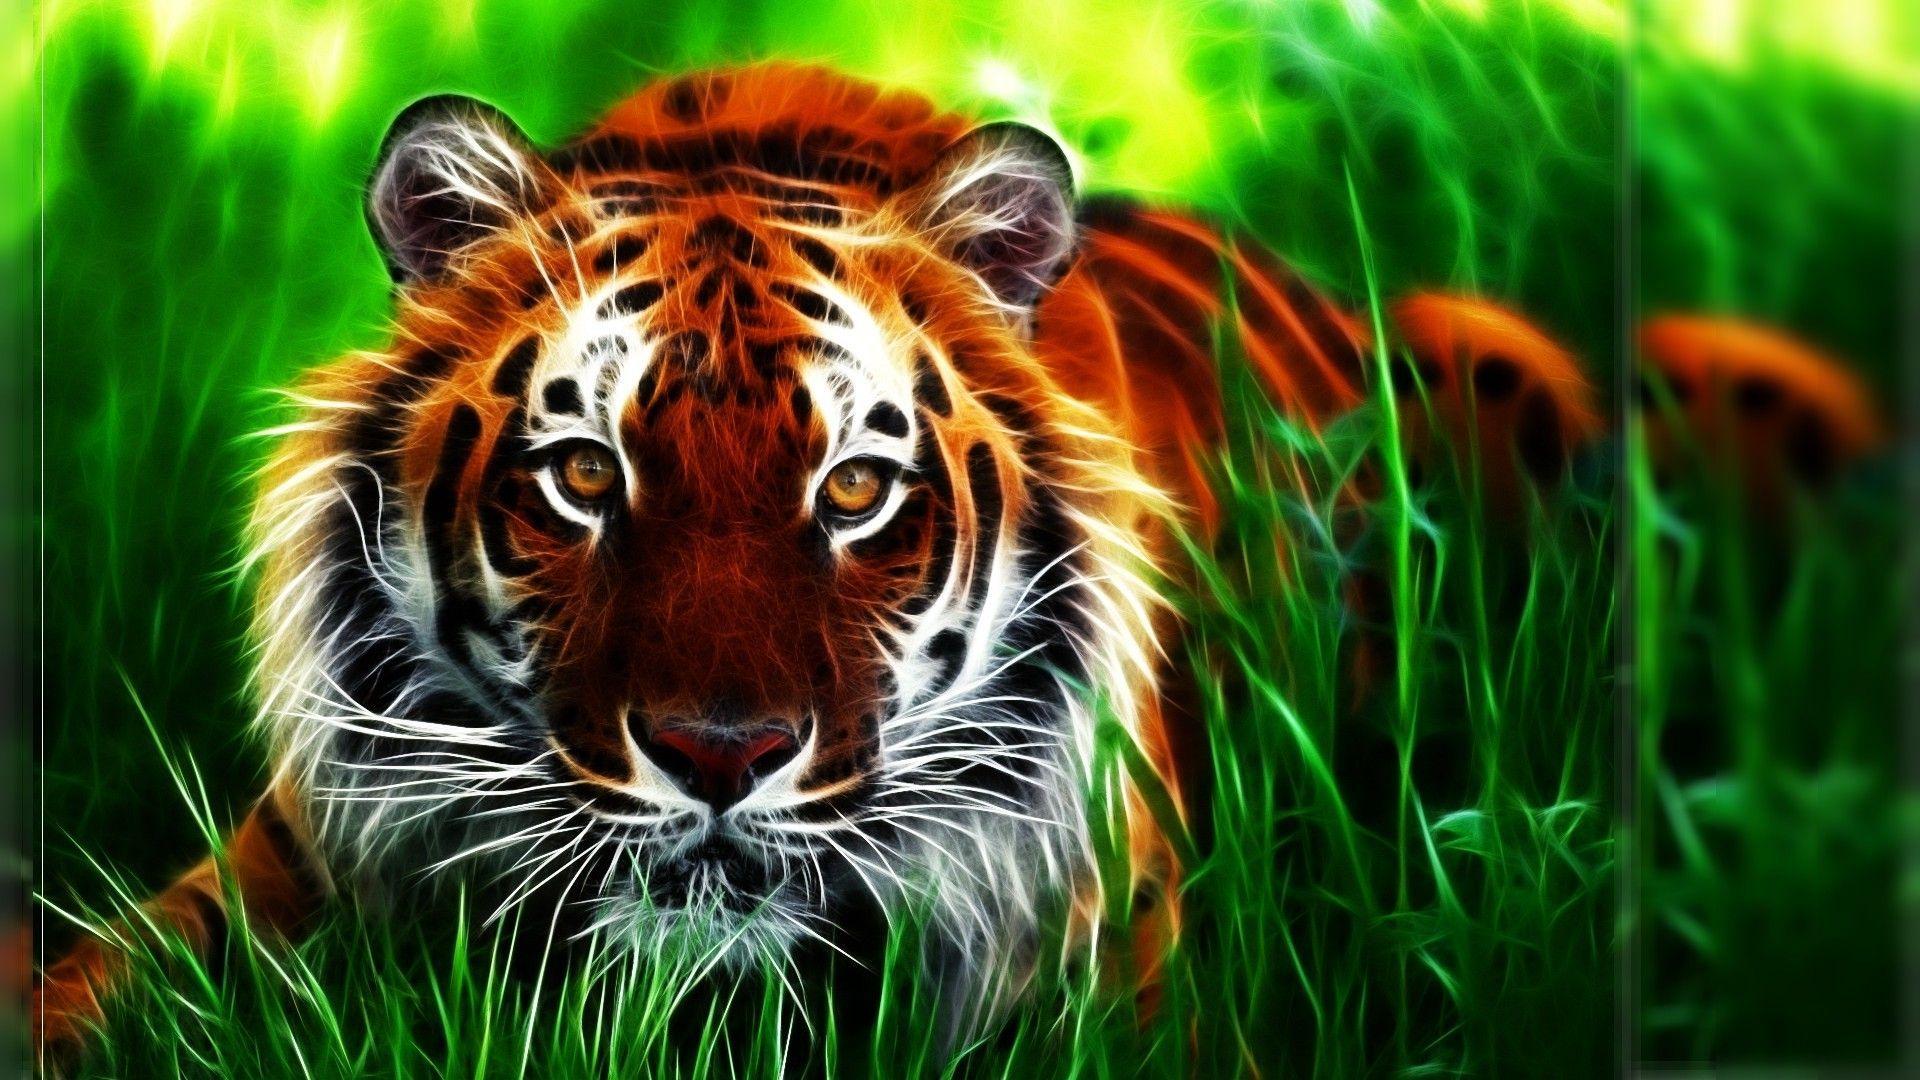 Amazing 3D HD wallpaper tiger On Image Wallpaper with 3D HD